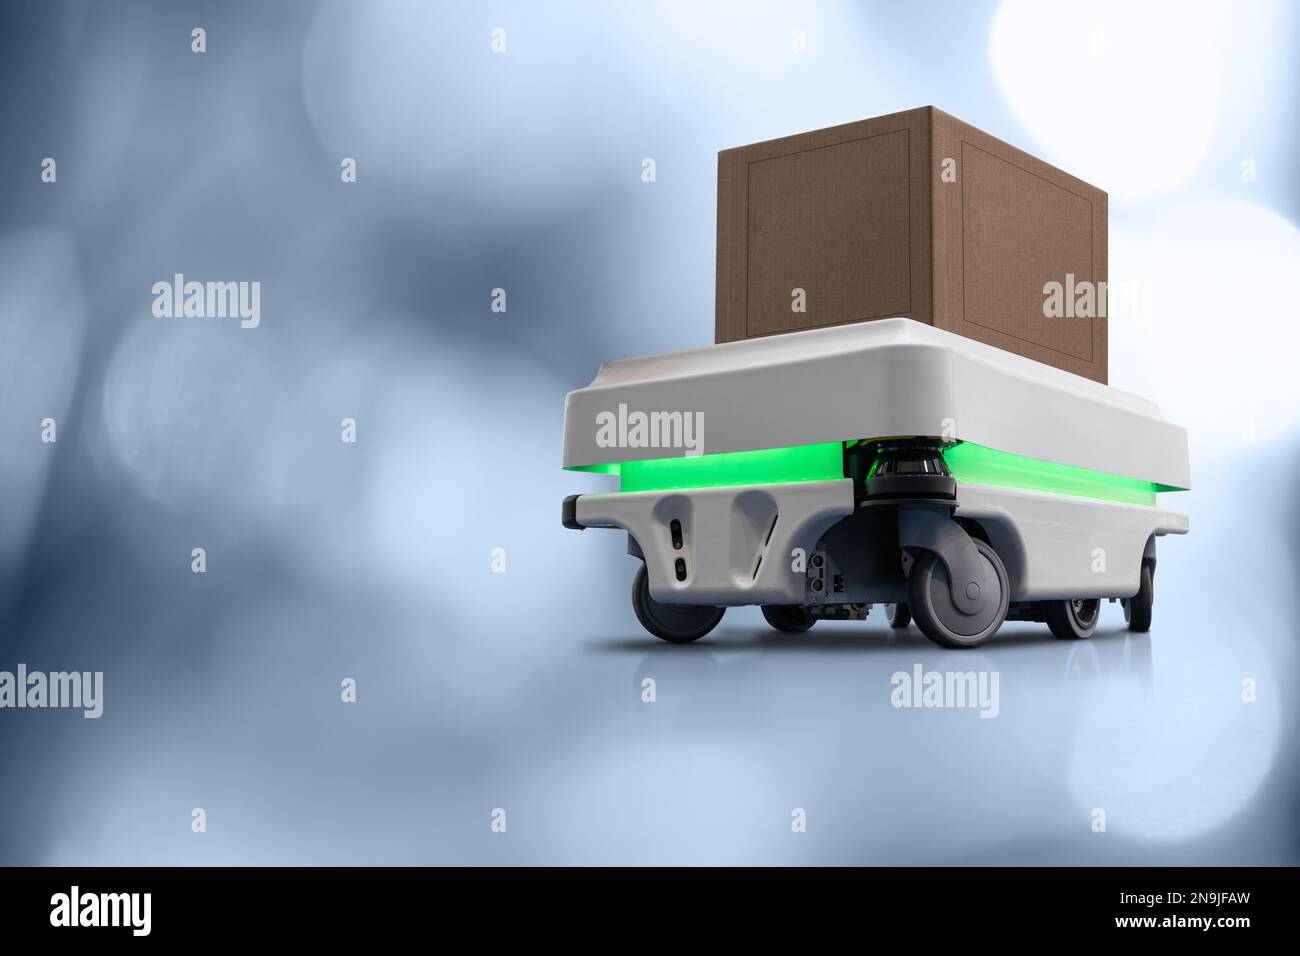 Mobile robot for transporting boxes Stock Photo